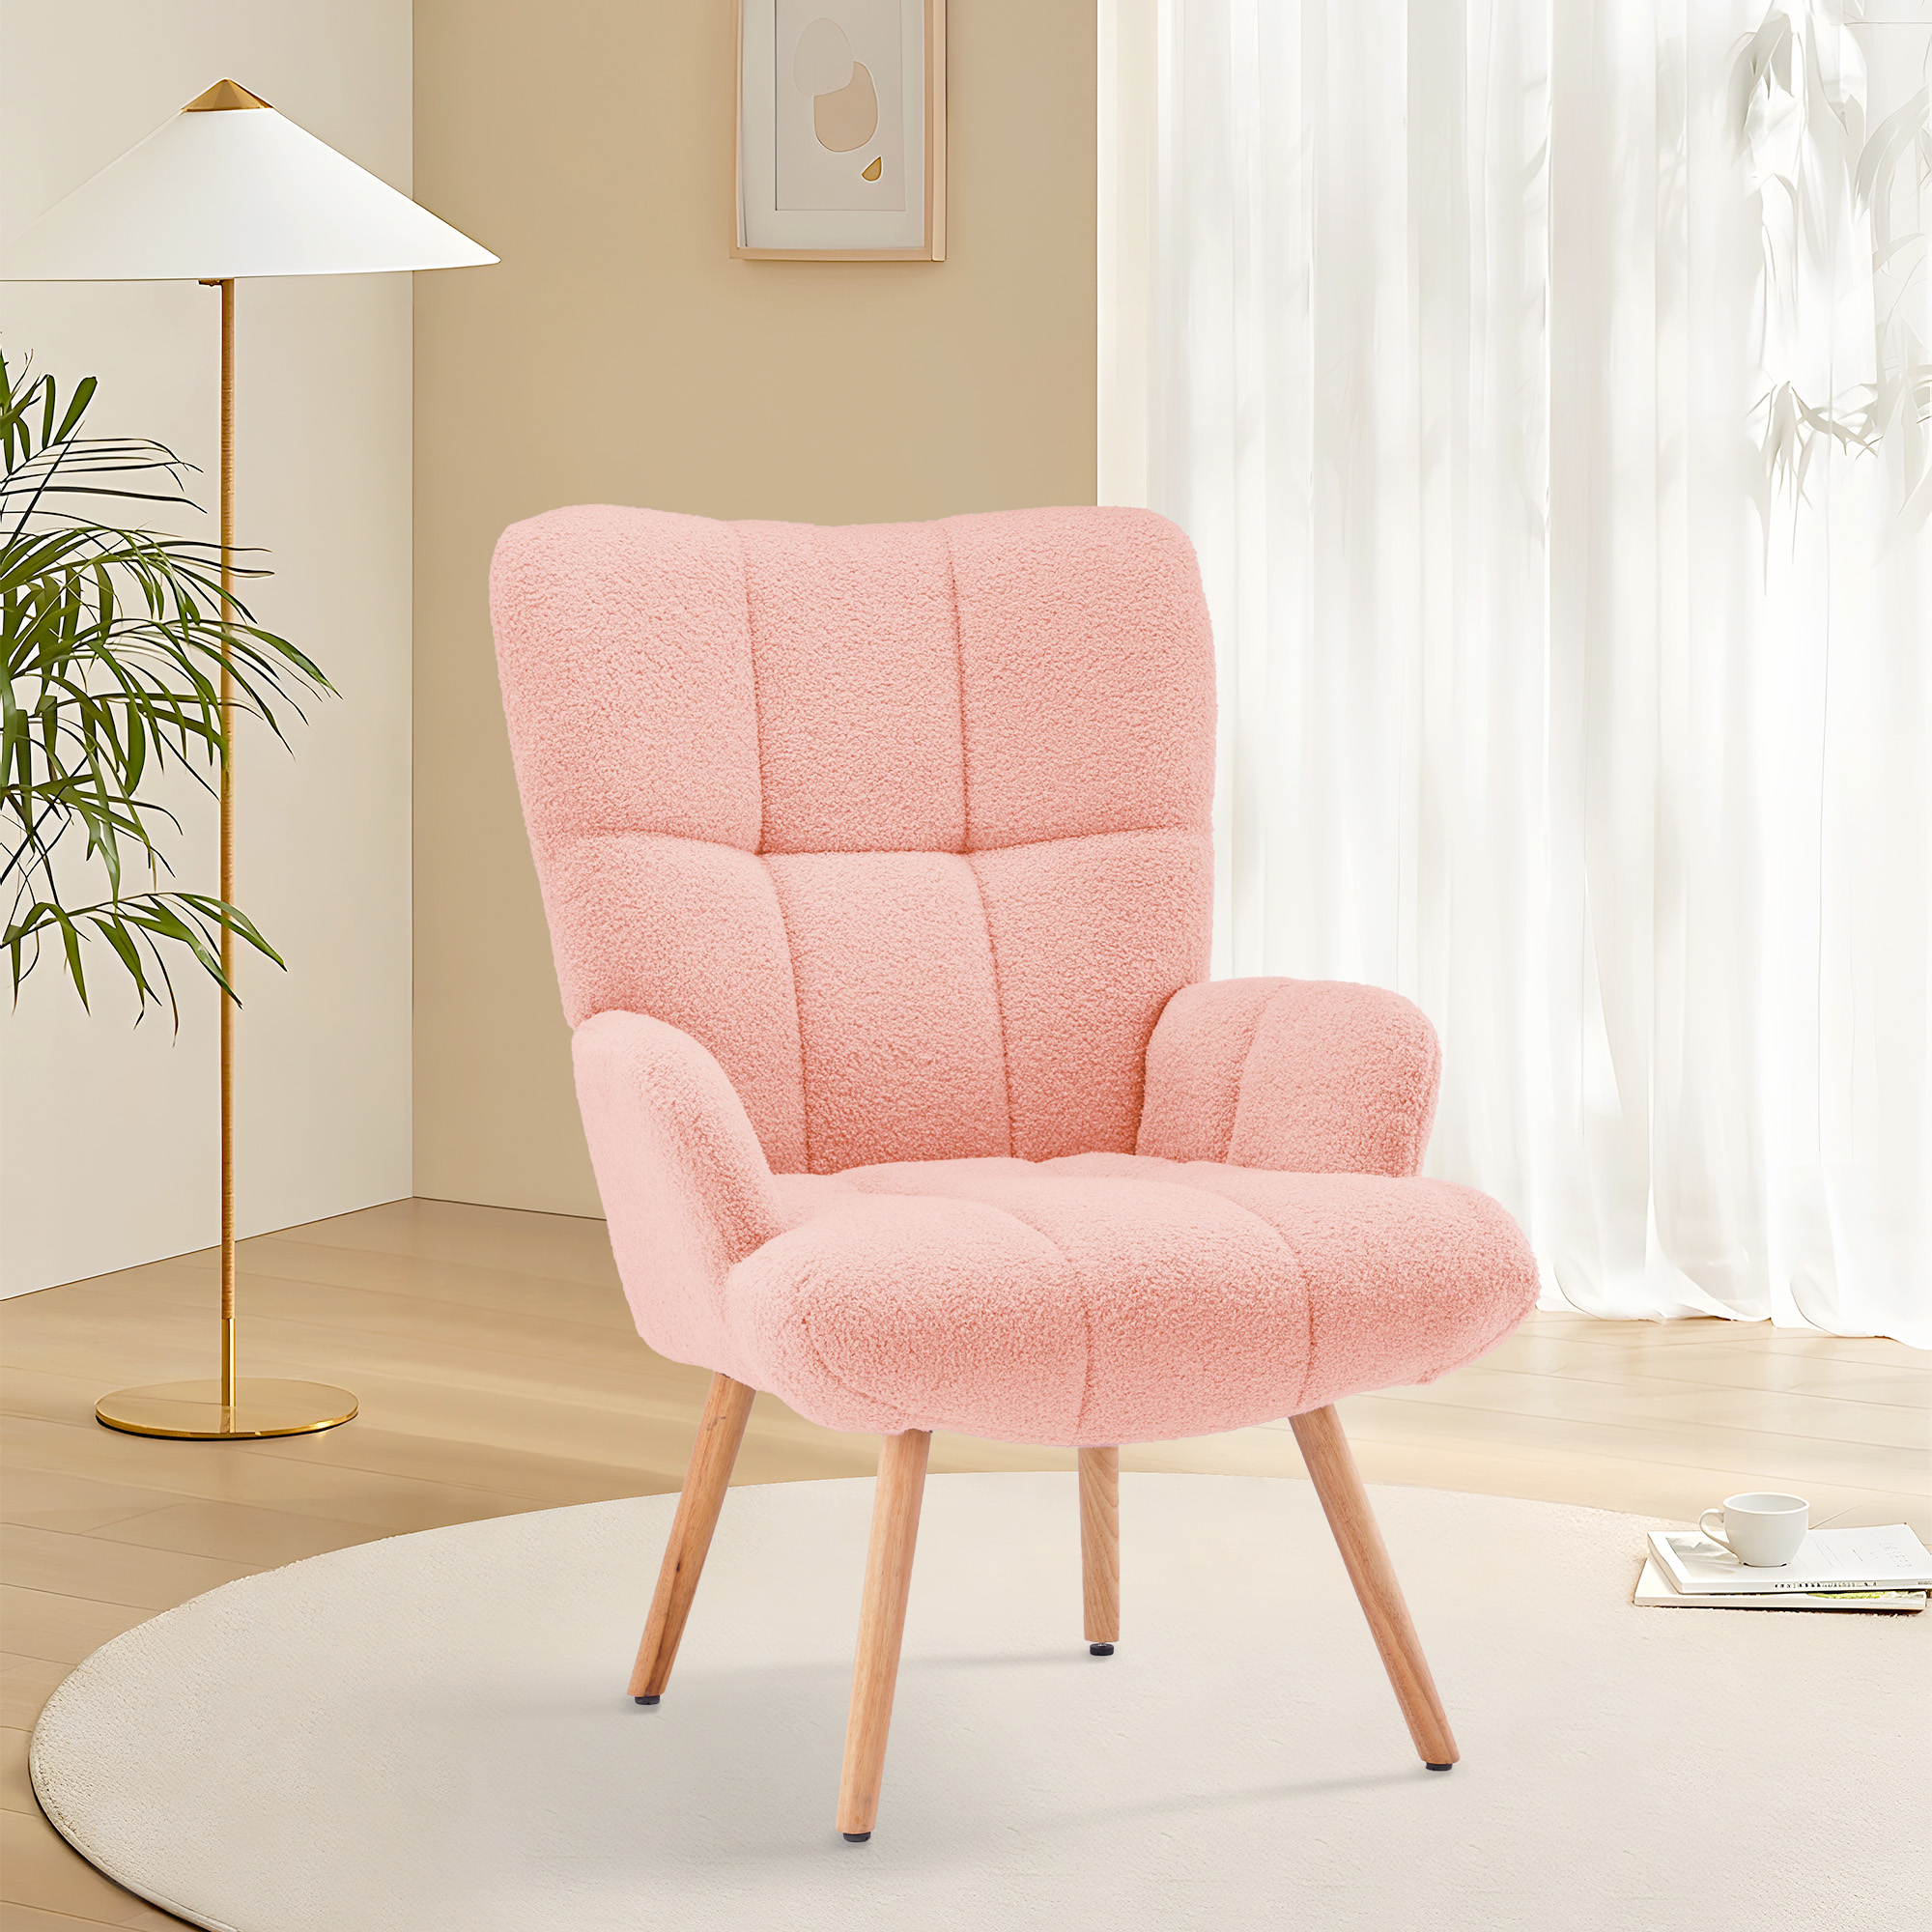 Mordern Accent Chair, Upholstered High Back Comfy Living Room Chair, Wingback Armchair, Basic Teddy Velvet Chair - Pink